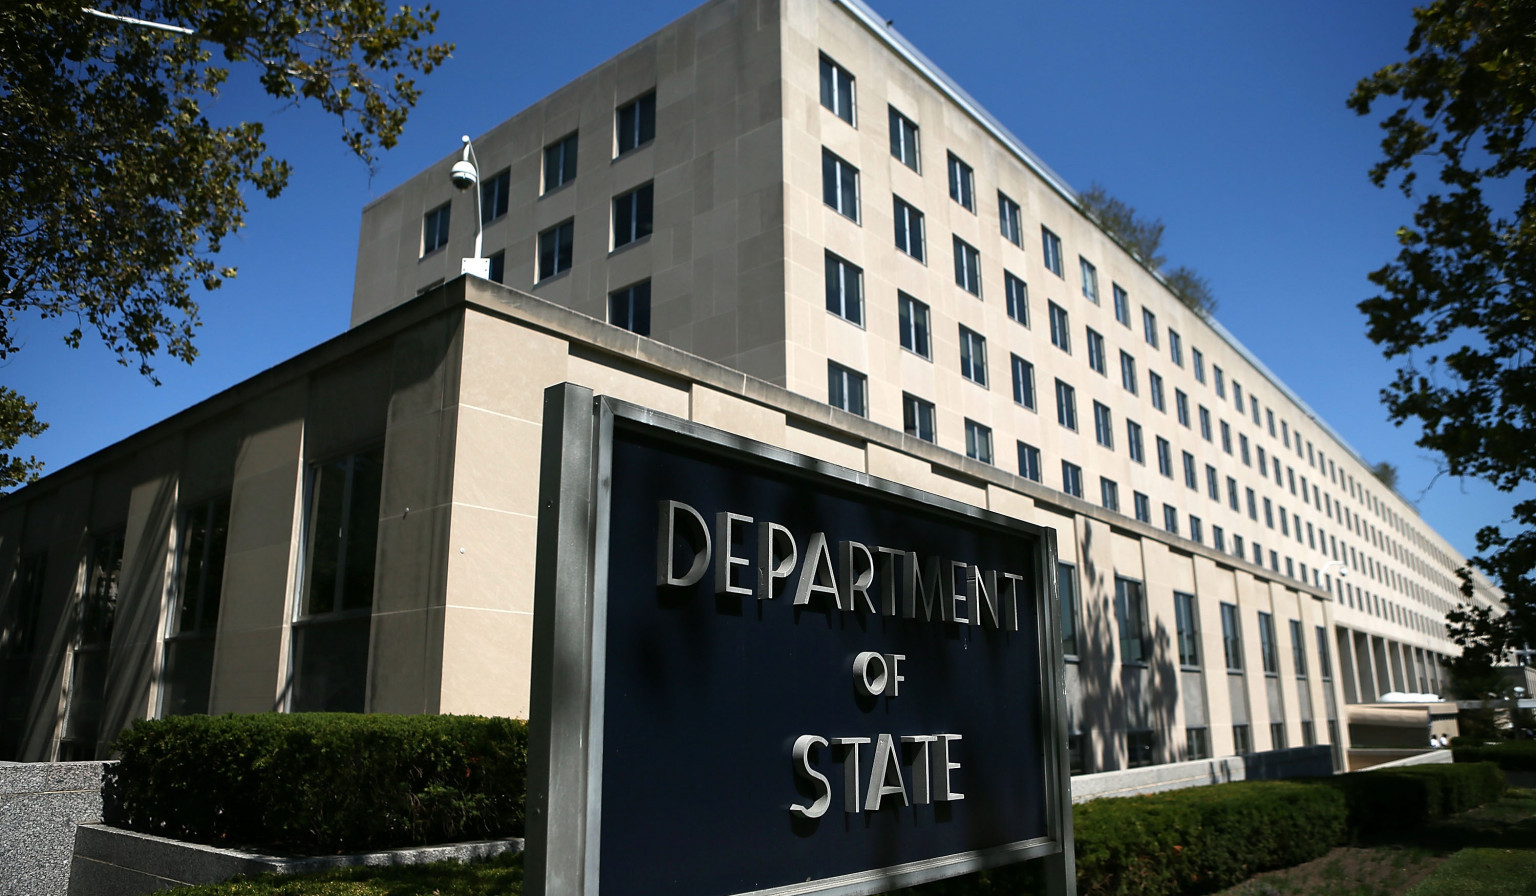 Azerbaijan on US State Department's list of countries under special observation regarding religious freedom